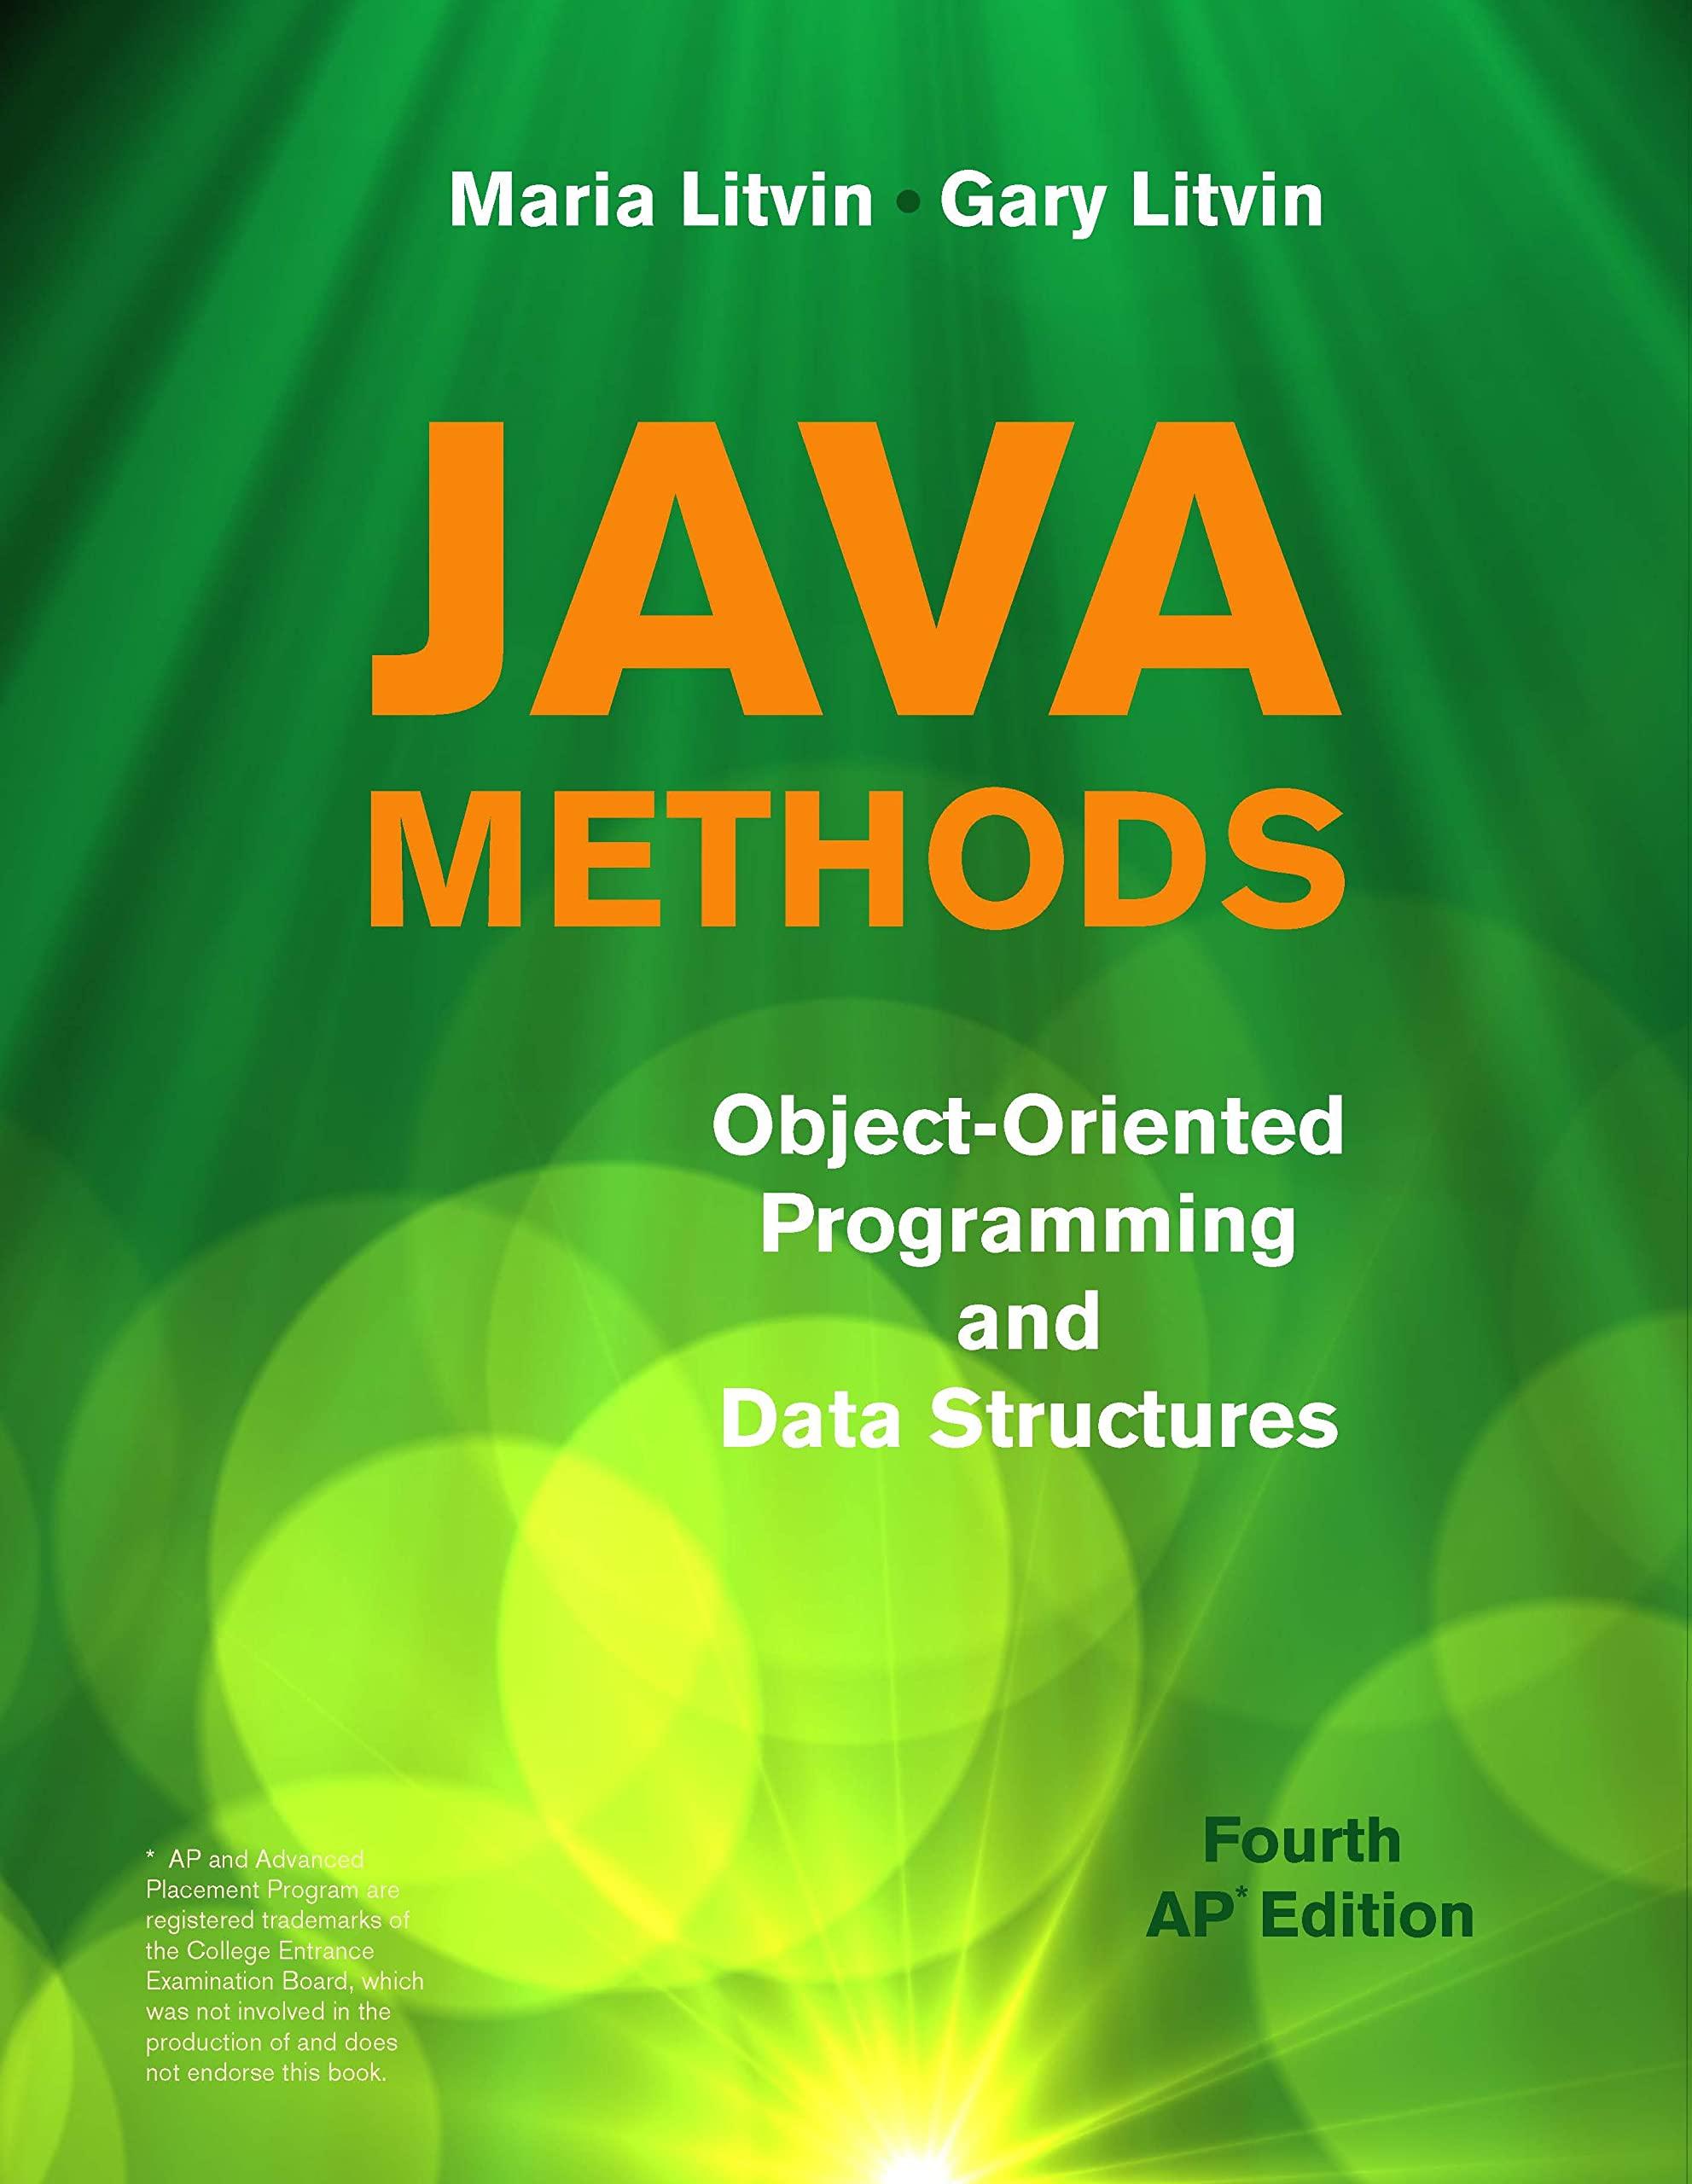 java methods object-oriented programming and data structures 4th edition maria litvin , gary litvin